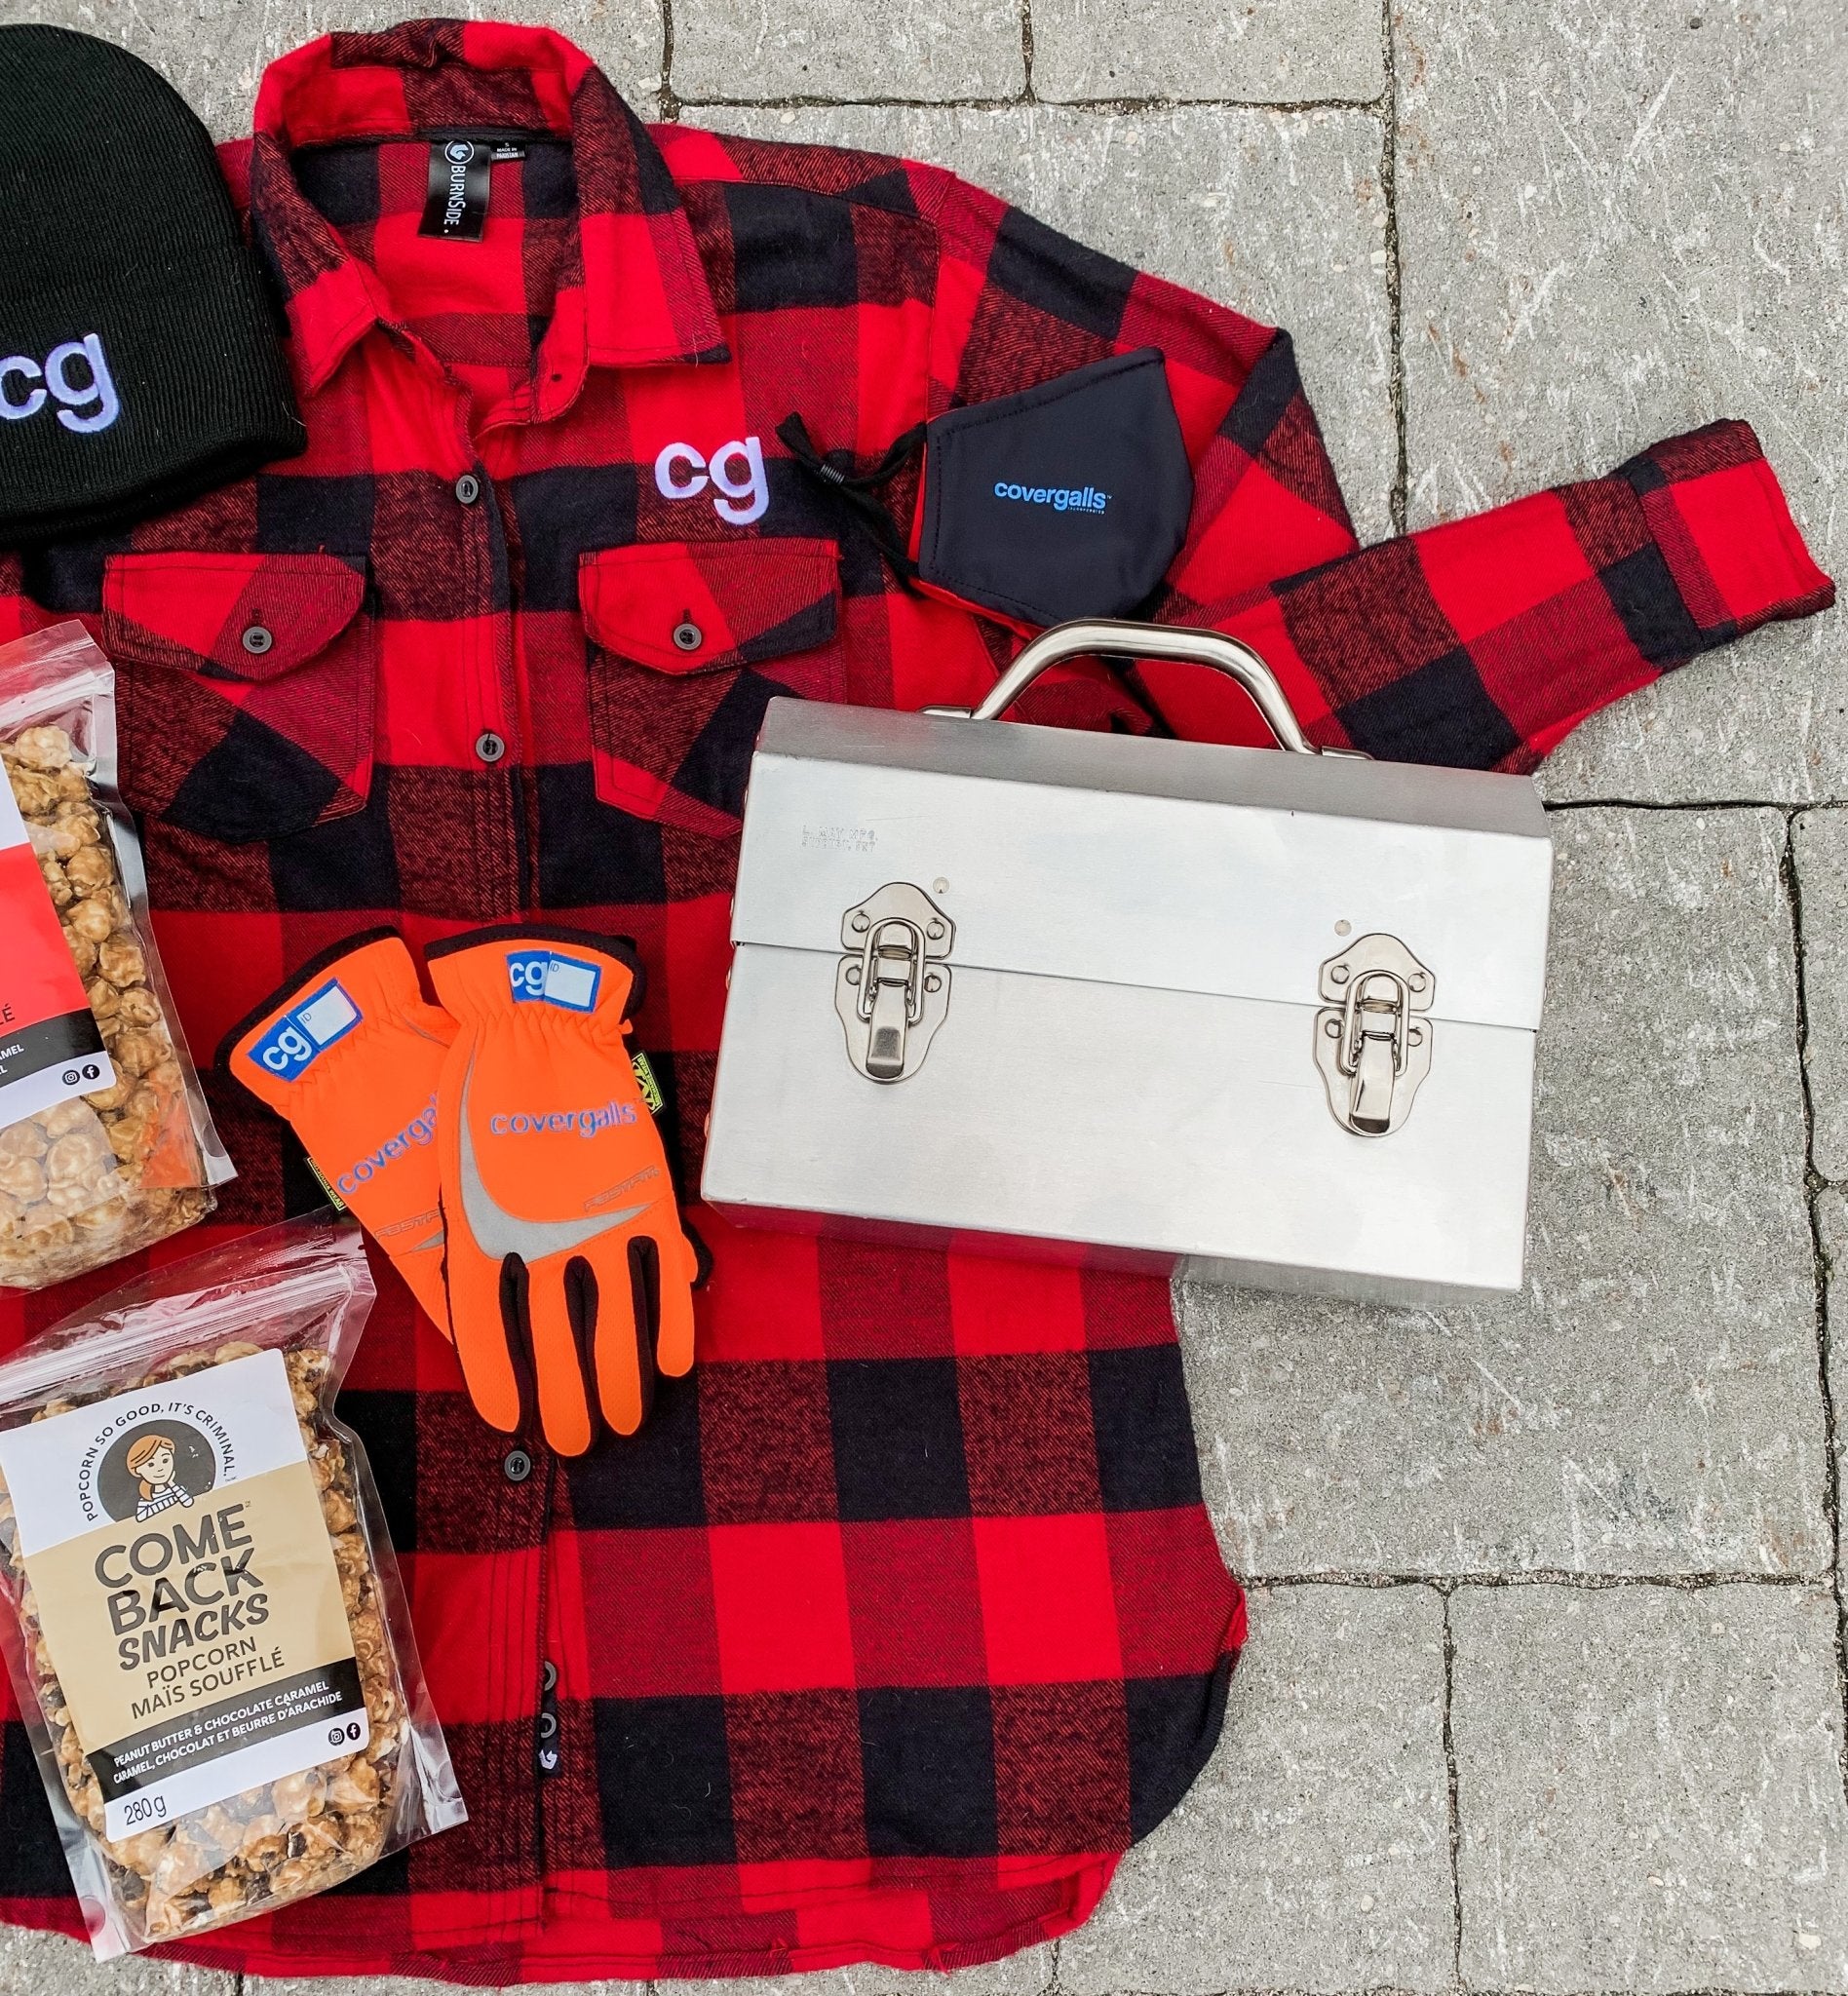 covergalls flannel t shirt and an L. May metal lunchbox with come back snacks